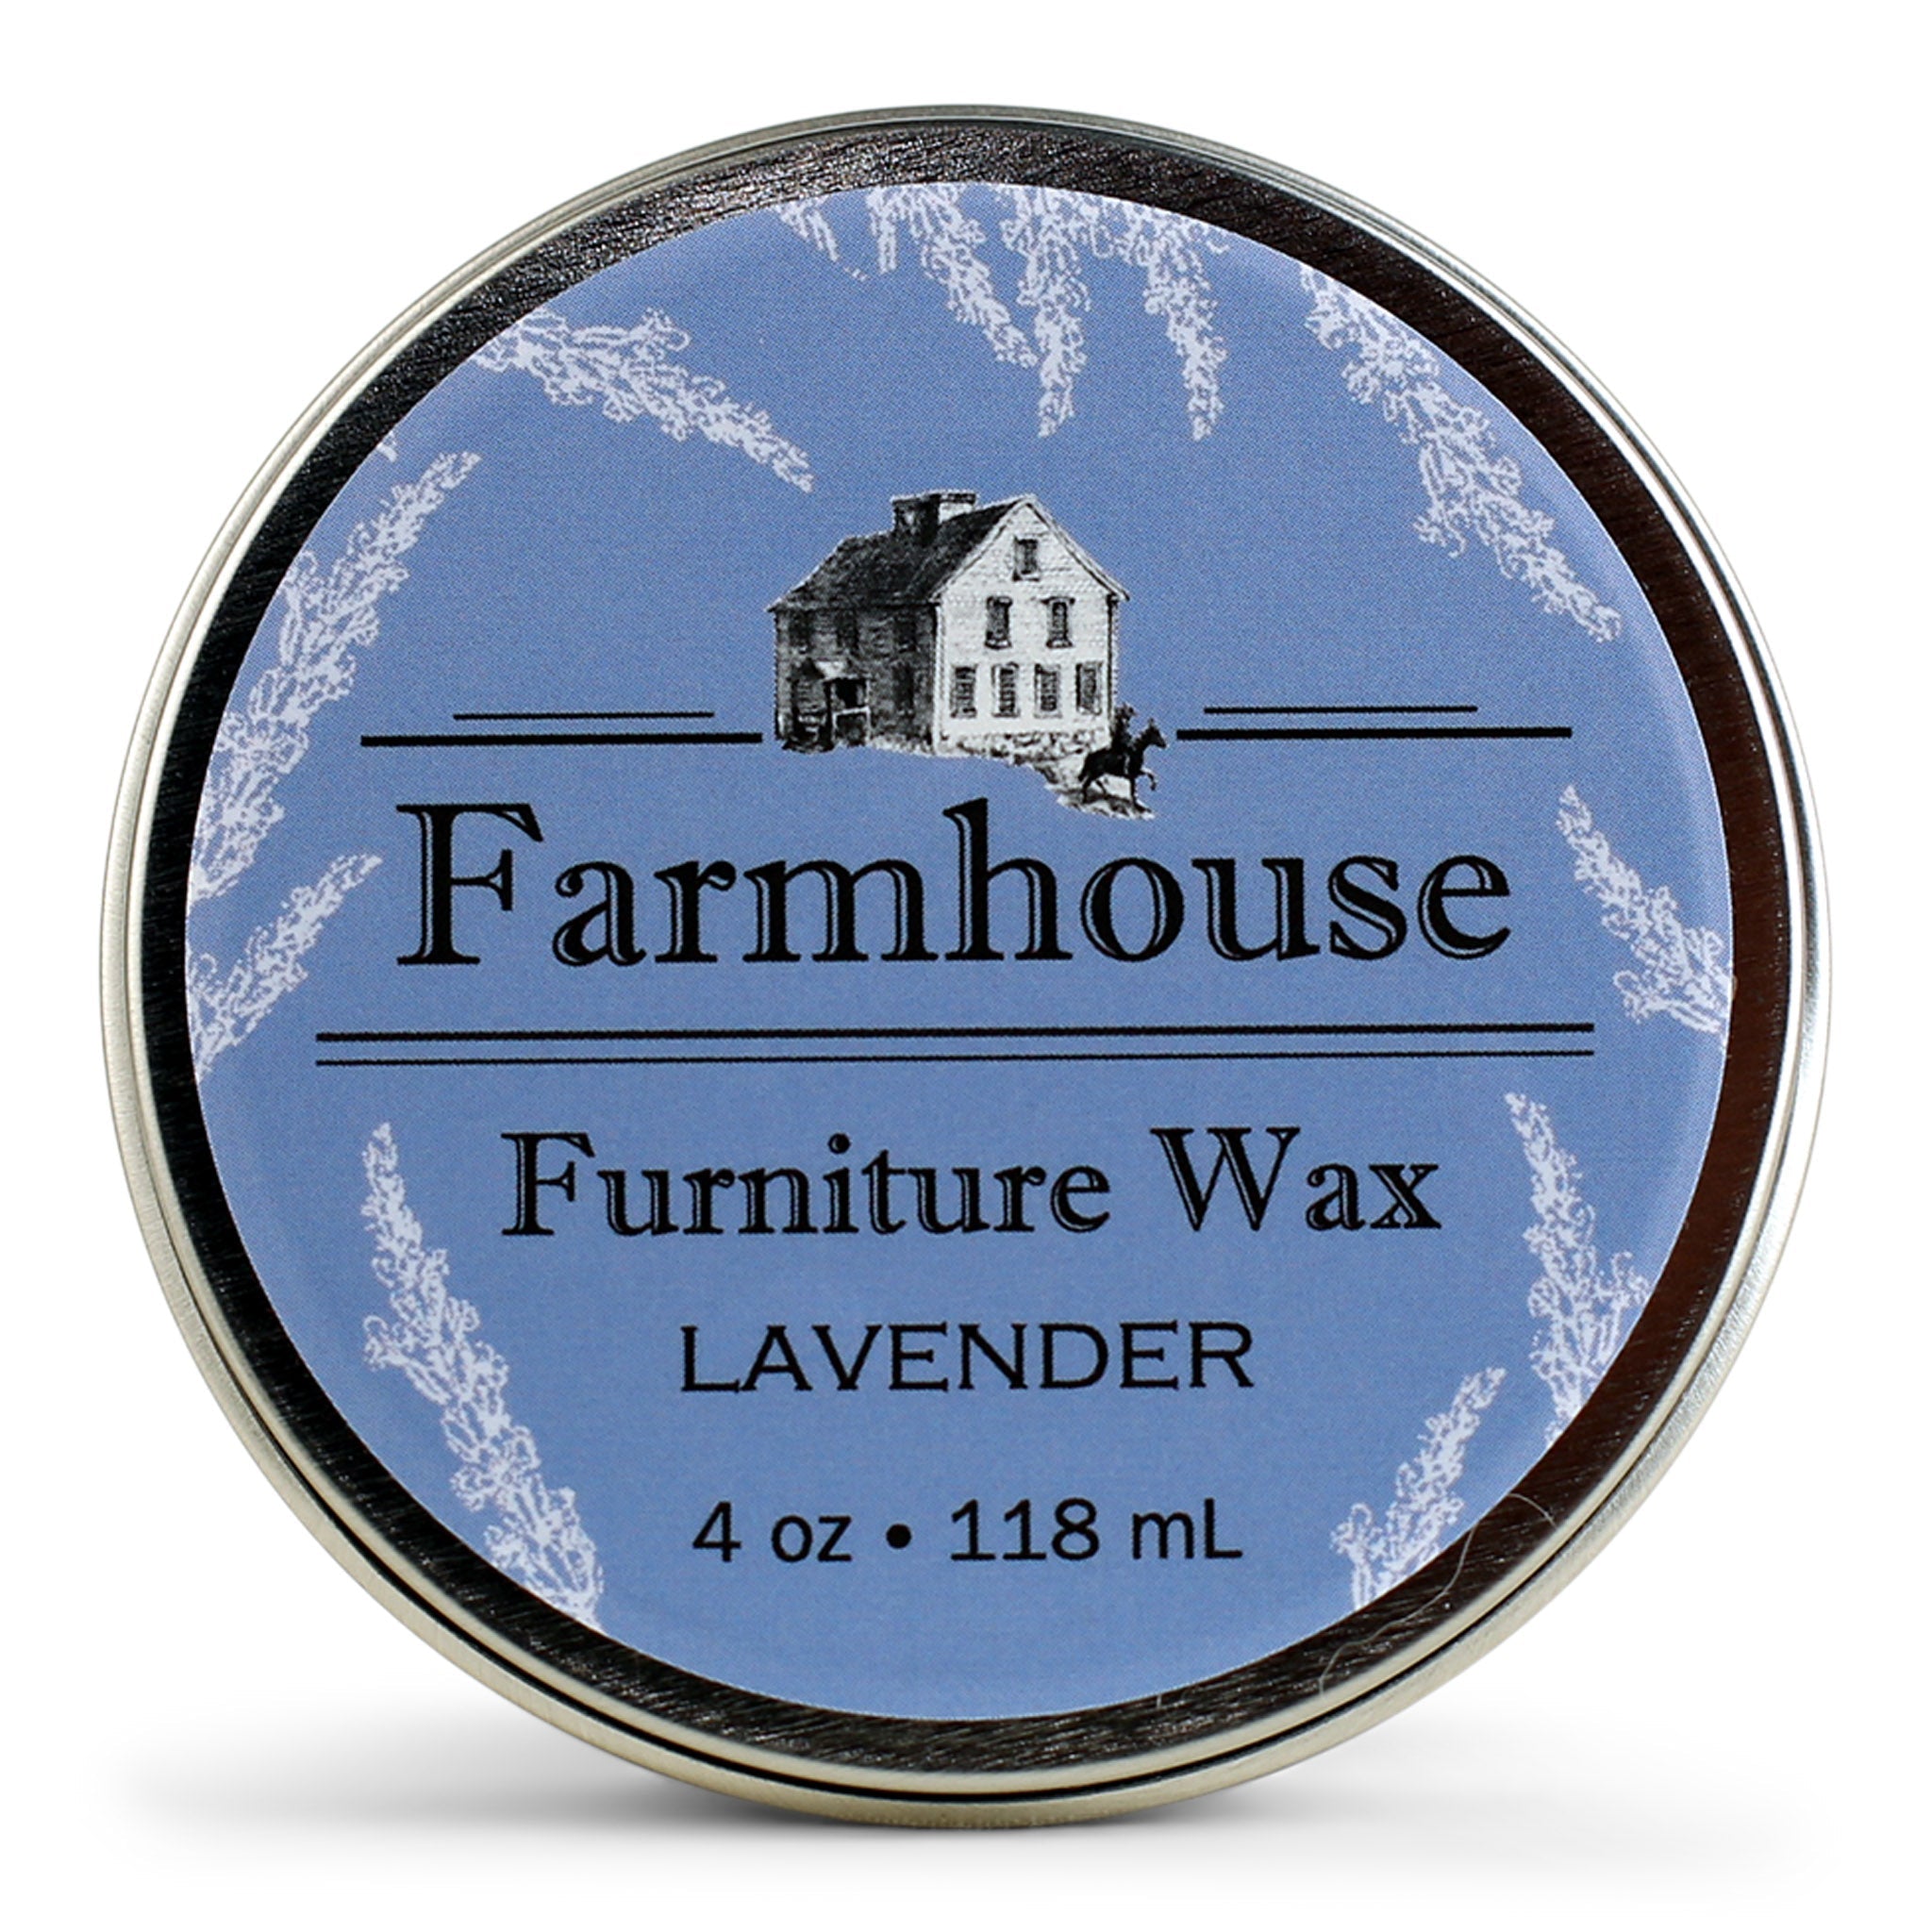 100% Natural Wood Wax Finish for Furniture by Caron & Doucet – BeWea -  Together For Better Weather